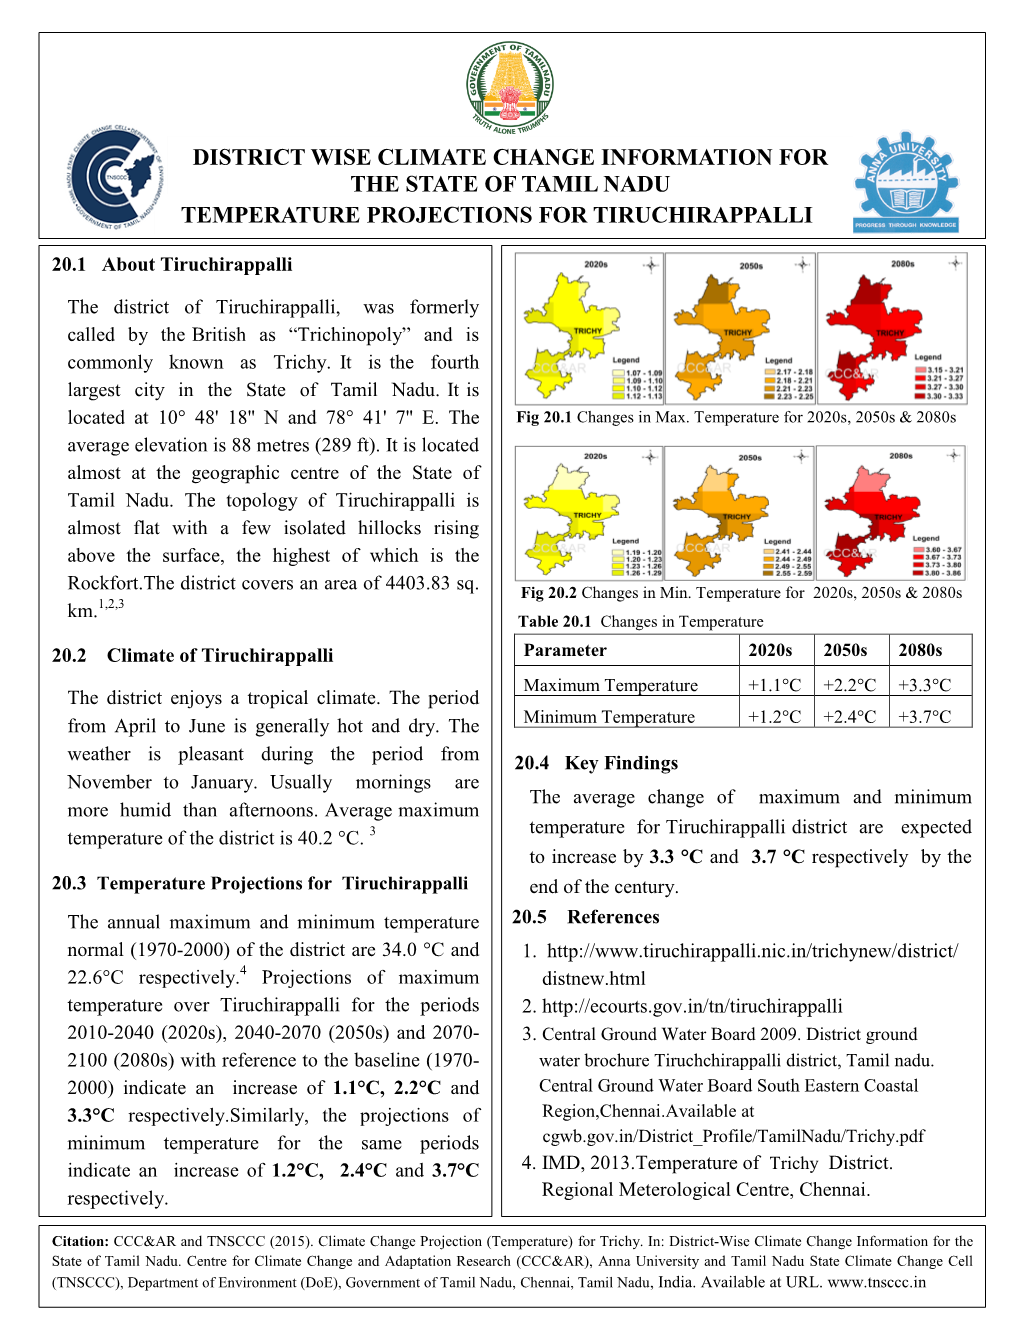 District Wise Climate Change Information for the State of Tamil Nadu Temperature Projections for Tiruchirappalli